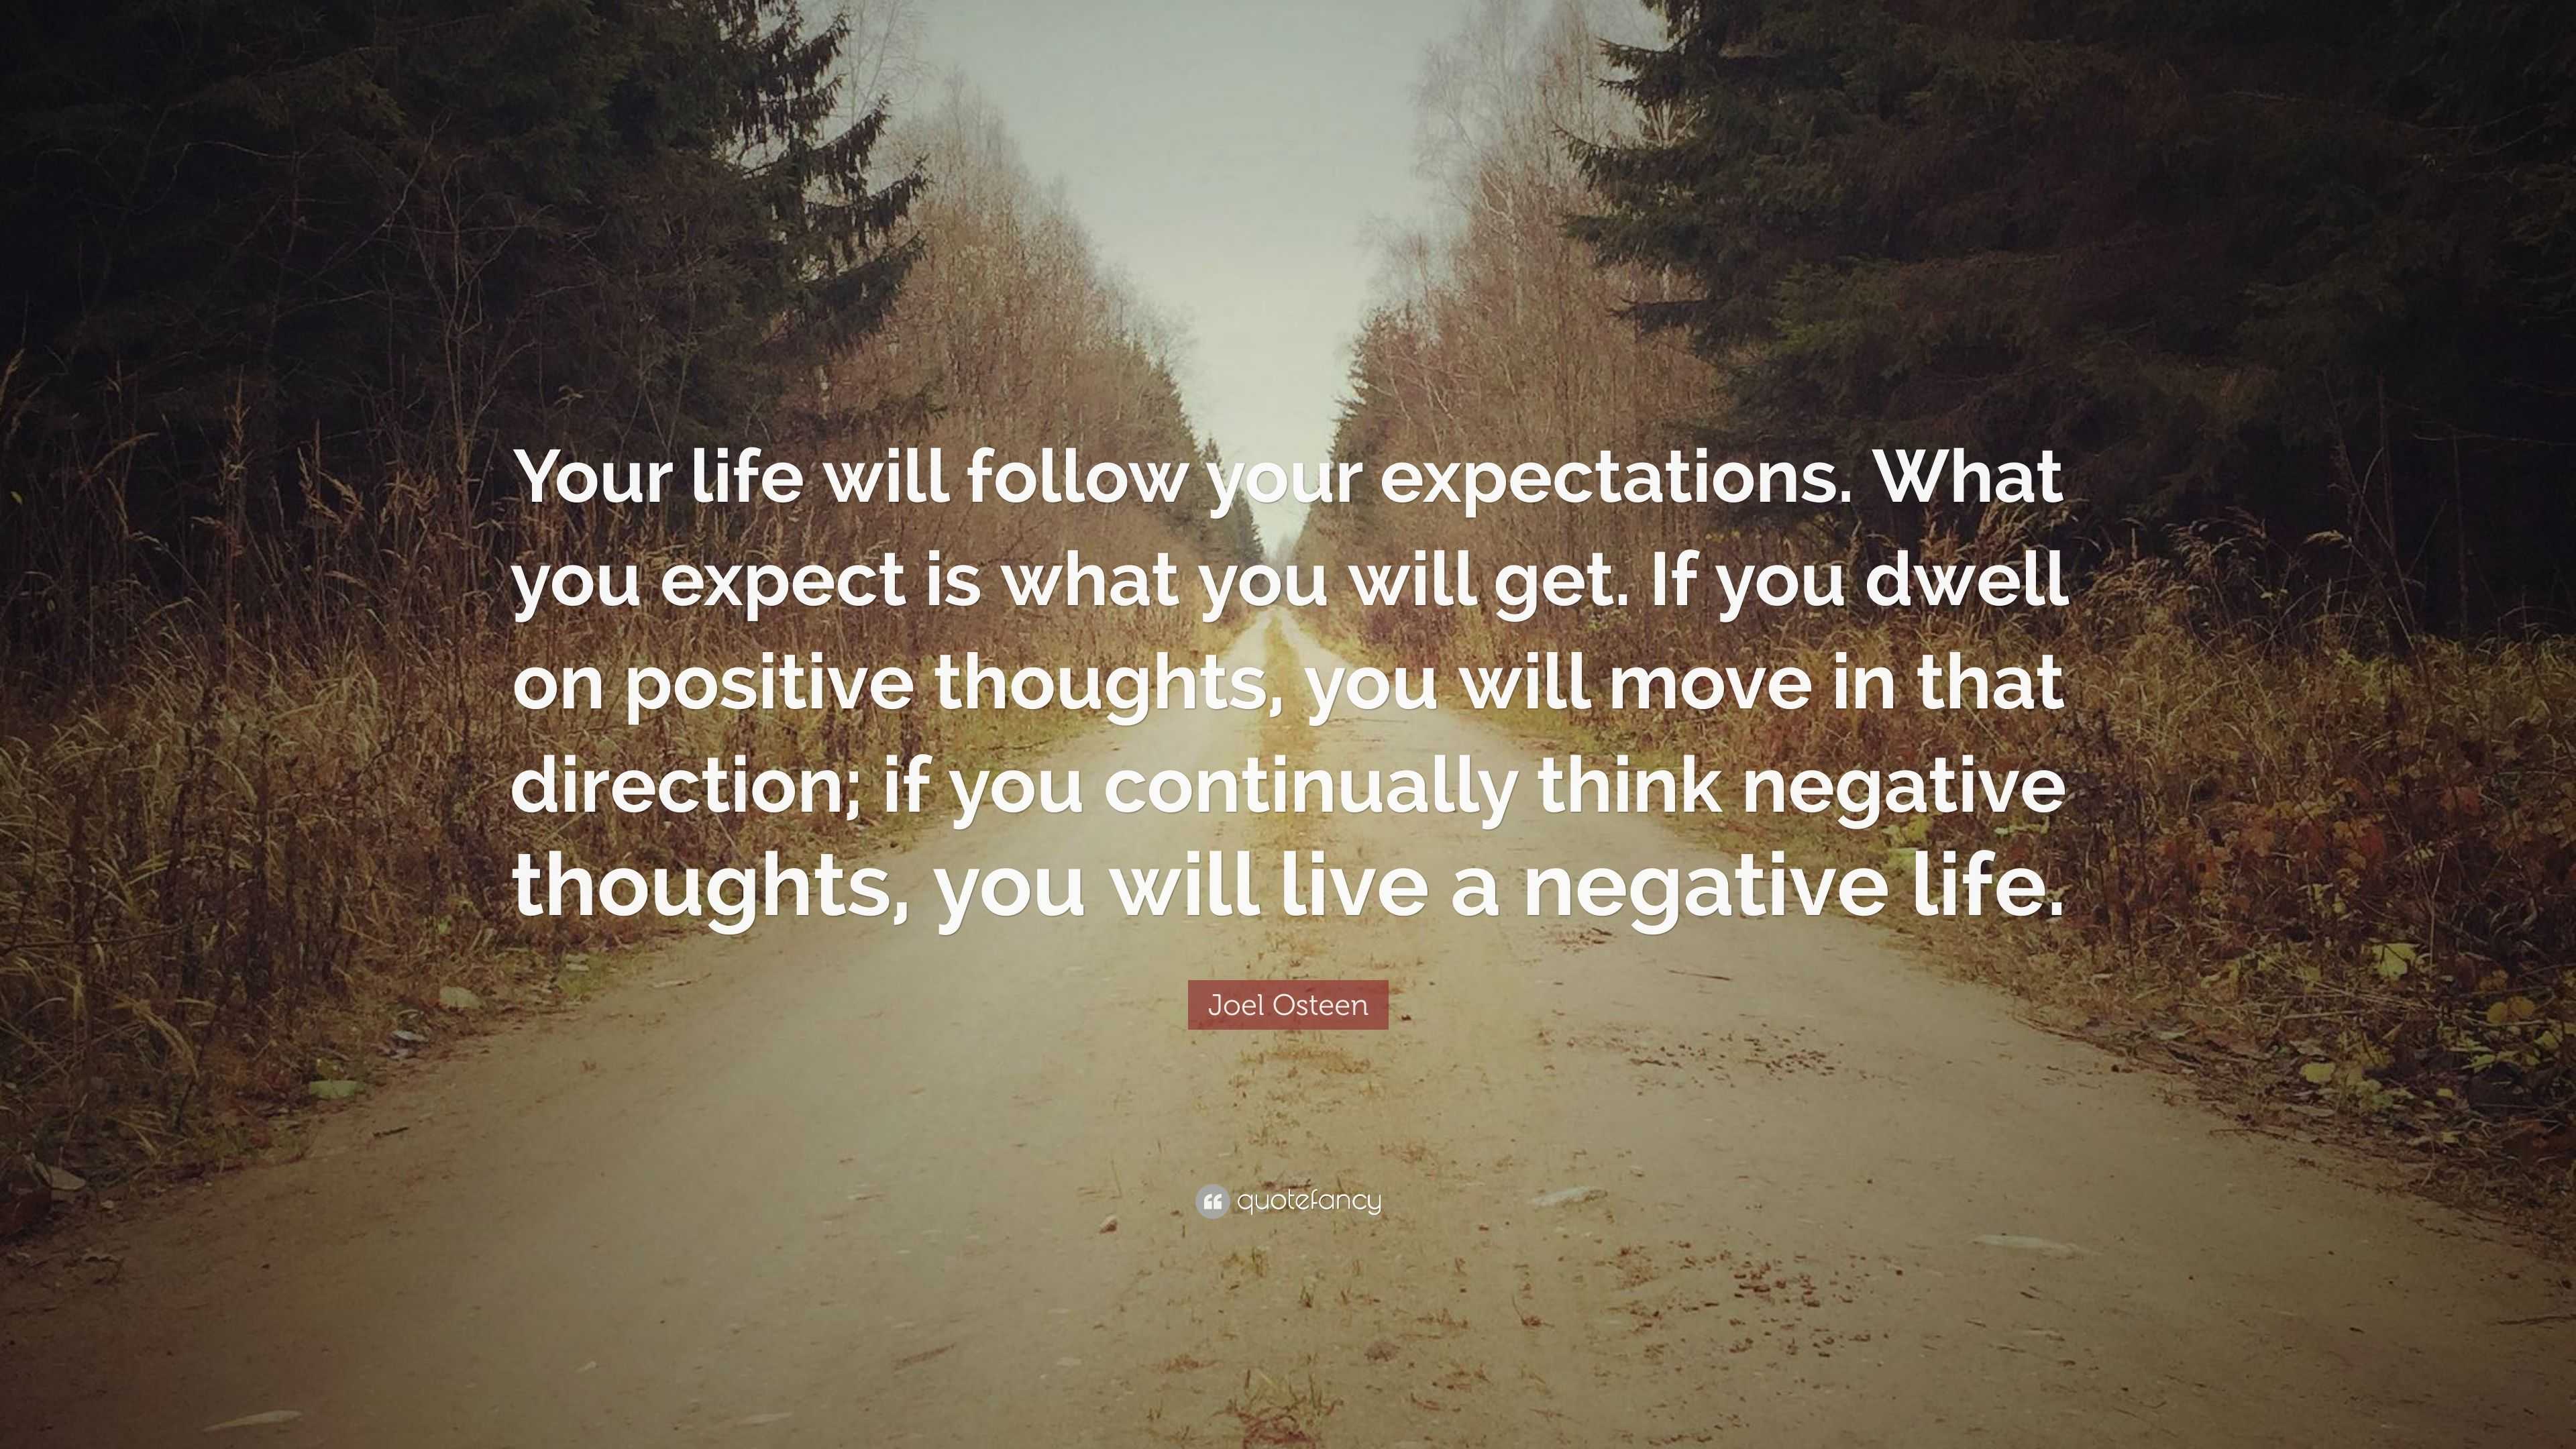 Joel Osteen Quote: “Your life will follow your expectations. What you ...